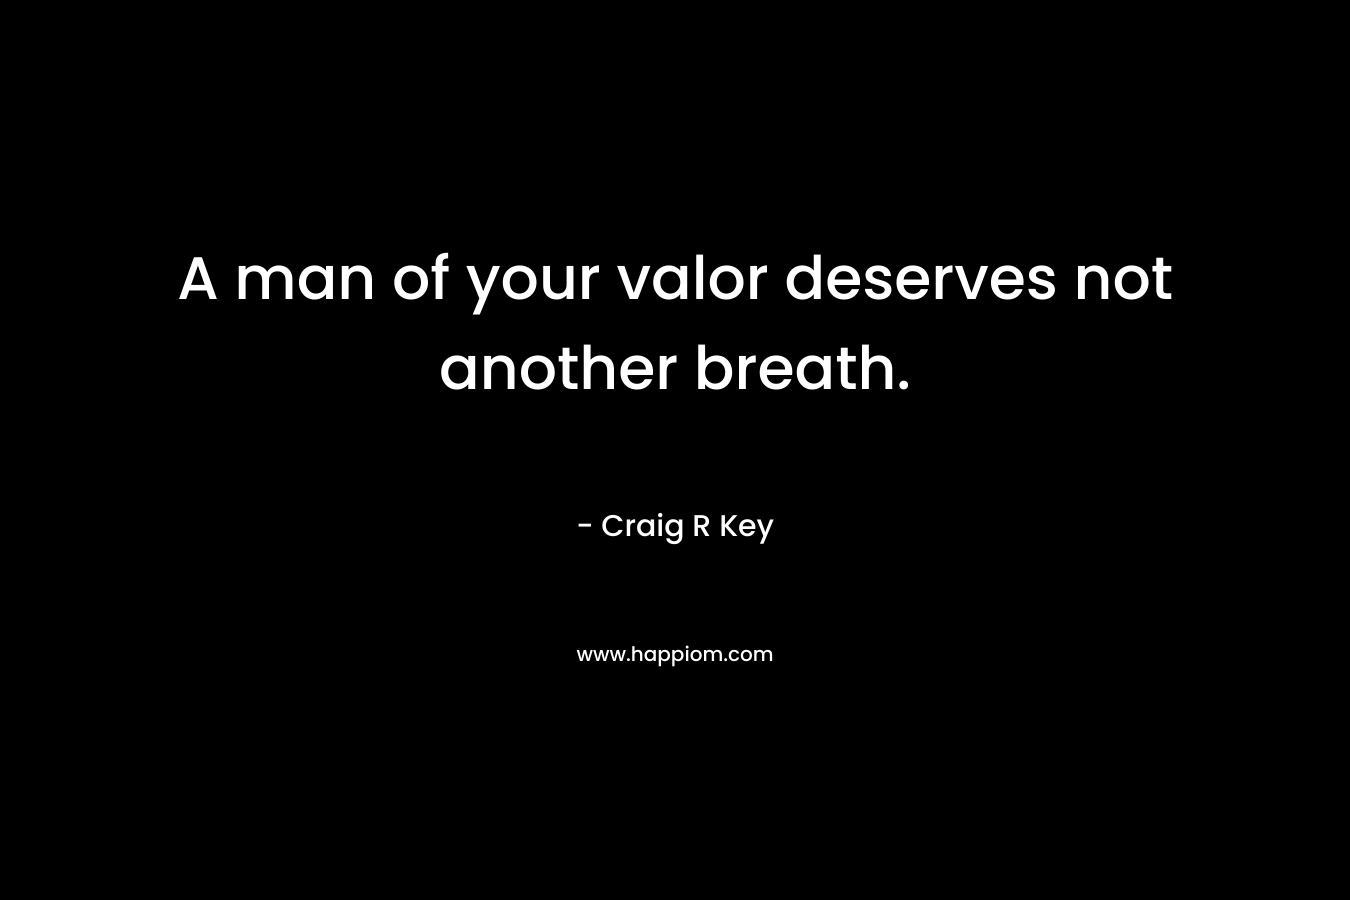 A man of your valor deserves not another breath.